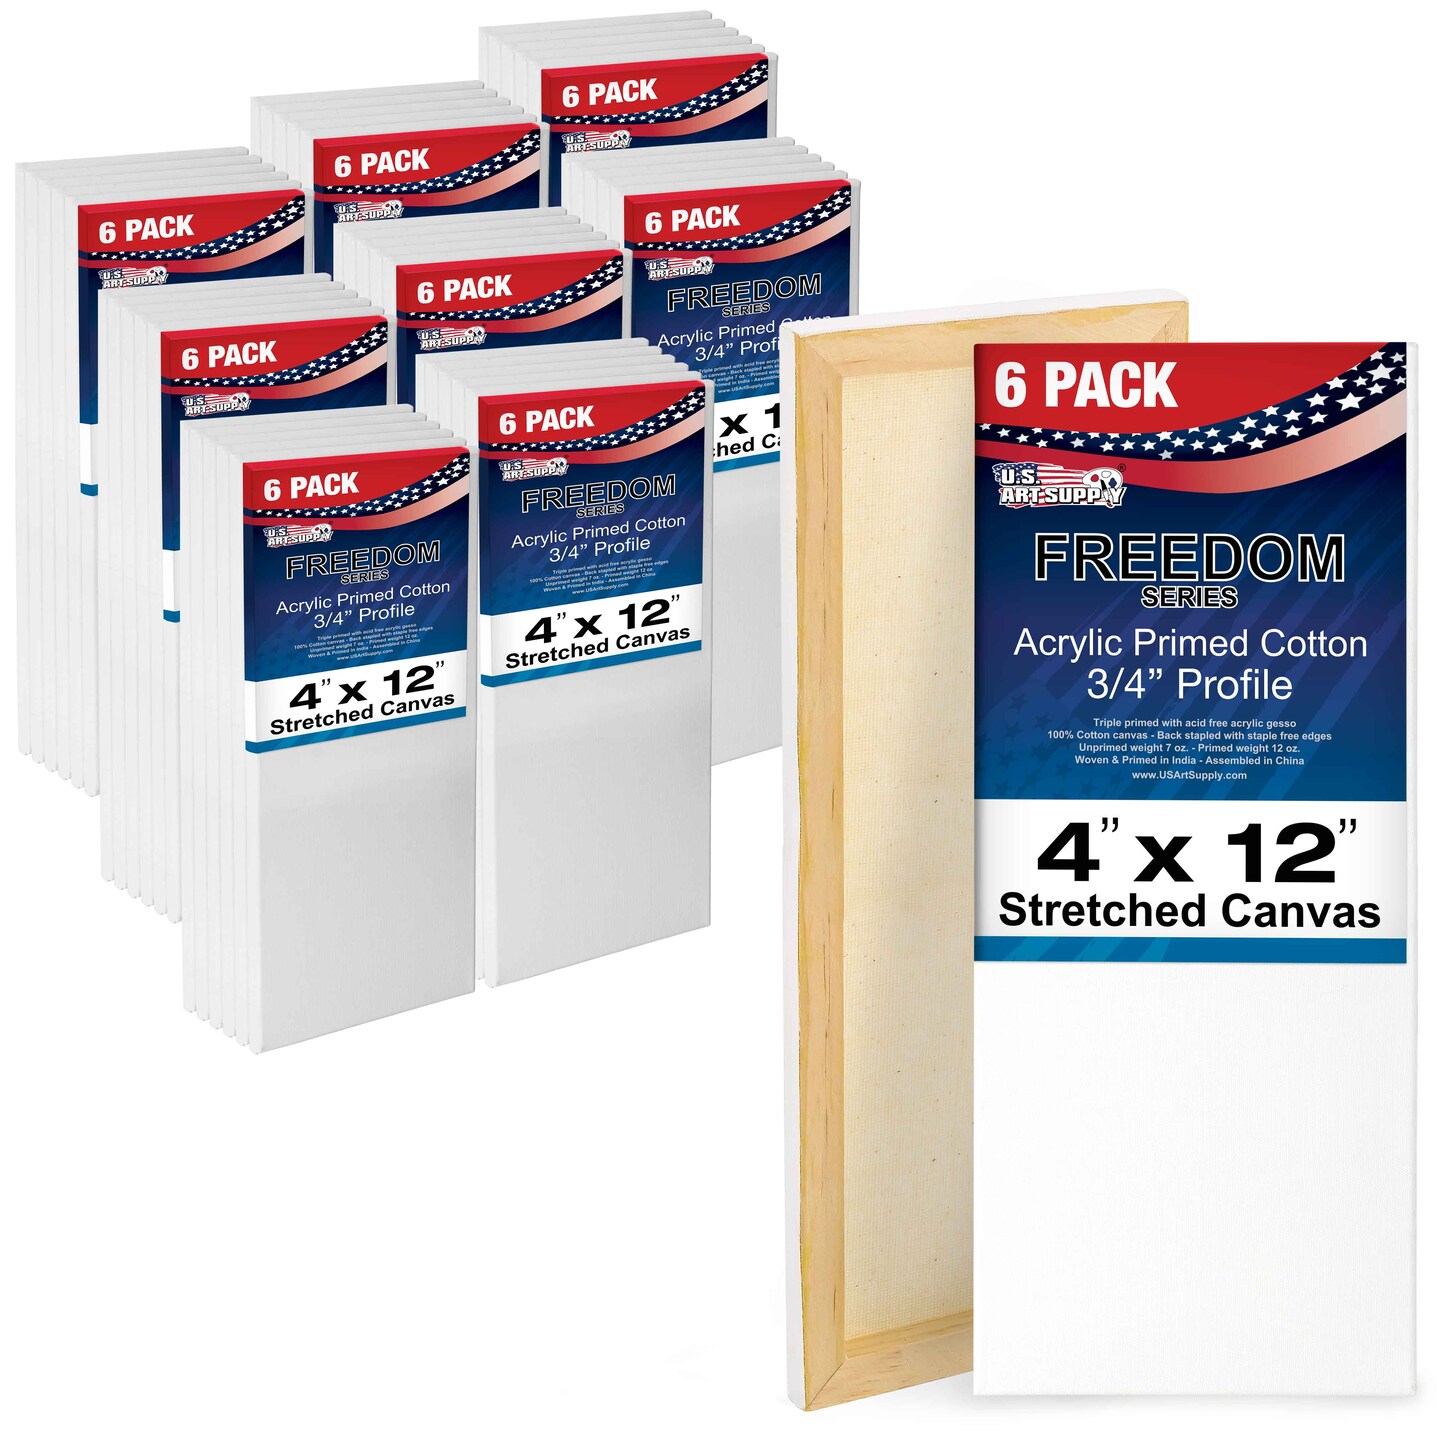 4 x 12 inch Stretched Canvas 12-Ounce Triple Primed, 48-Pack - Professional Artist Quality White Blank 3/4&#x22; Profile, 100% Cotton, Heavy-Weight Gesso